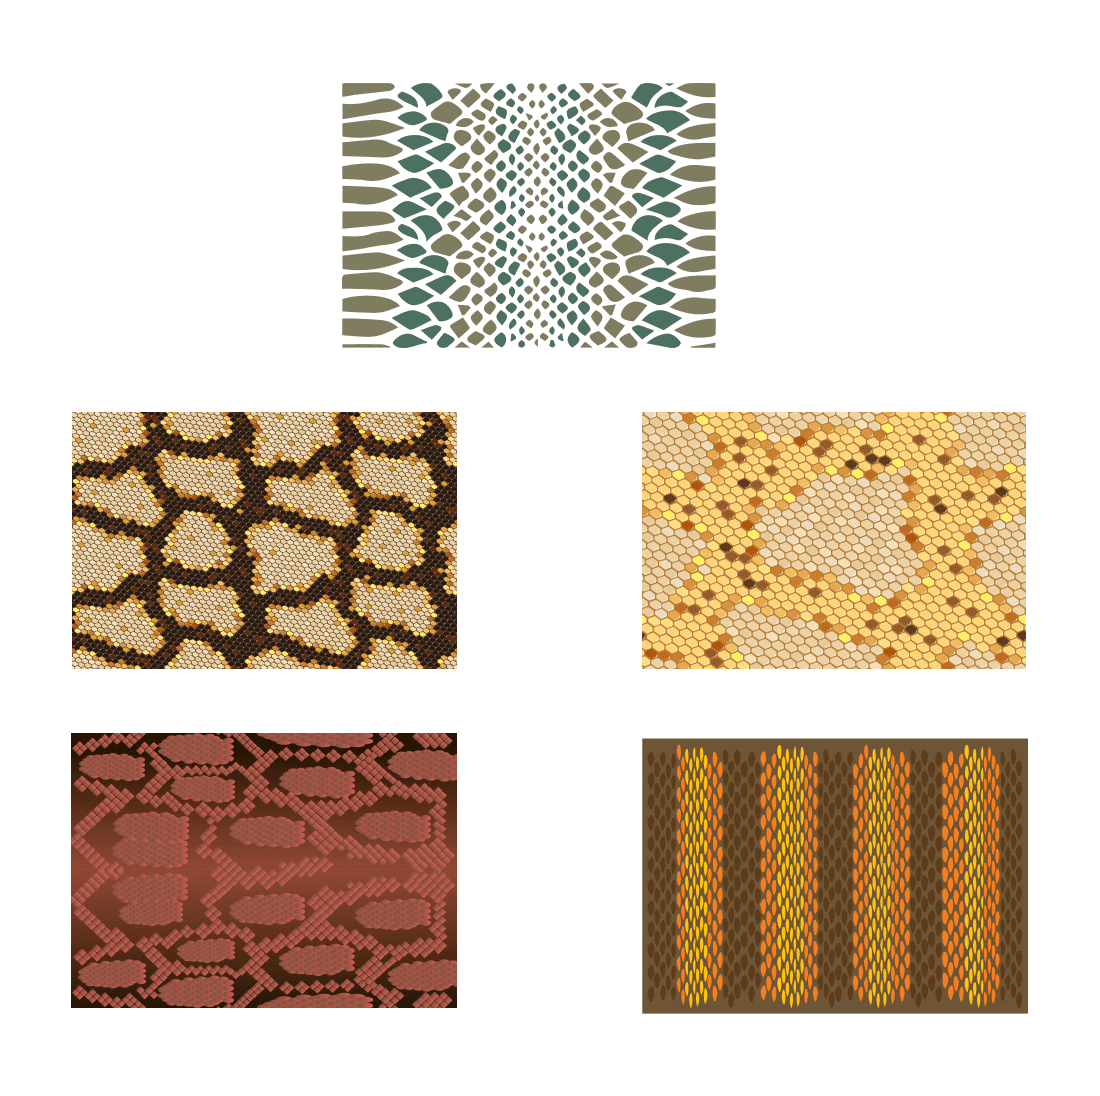 Group of different patterns on a white background.